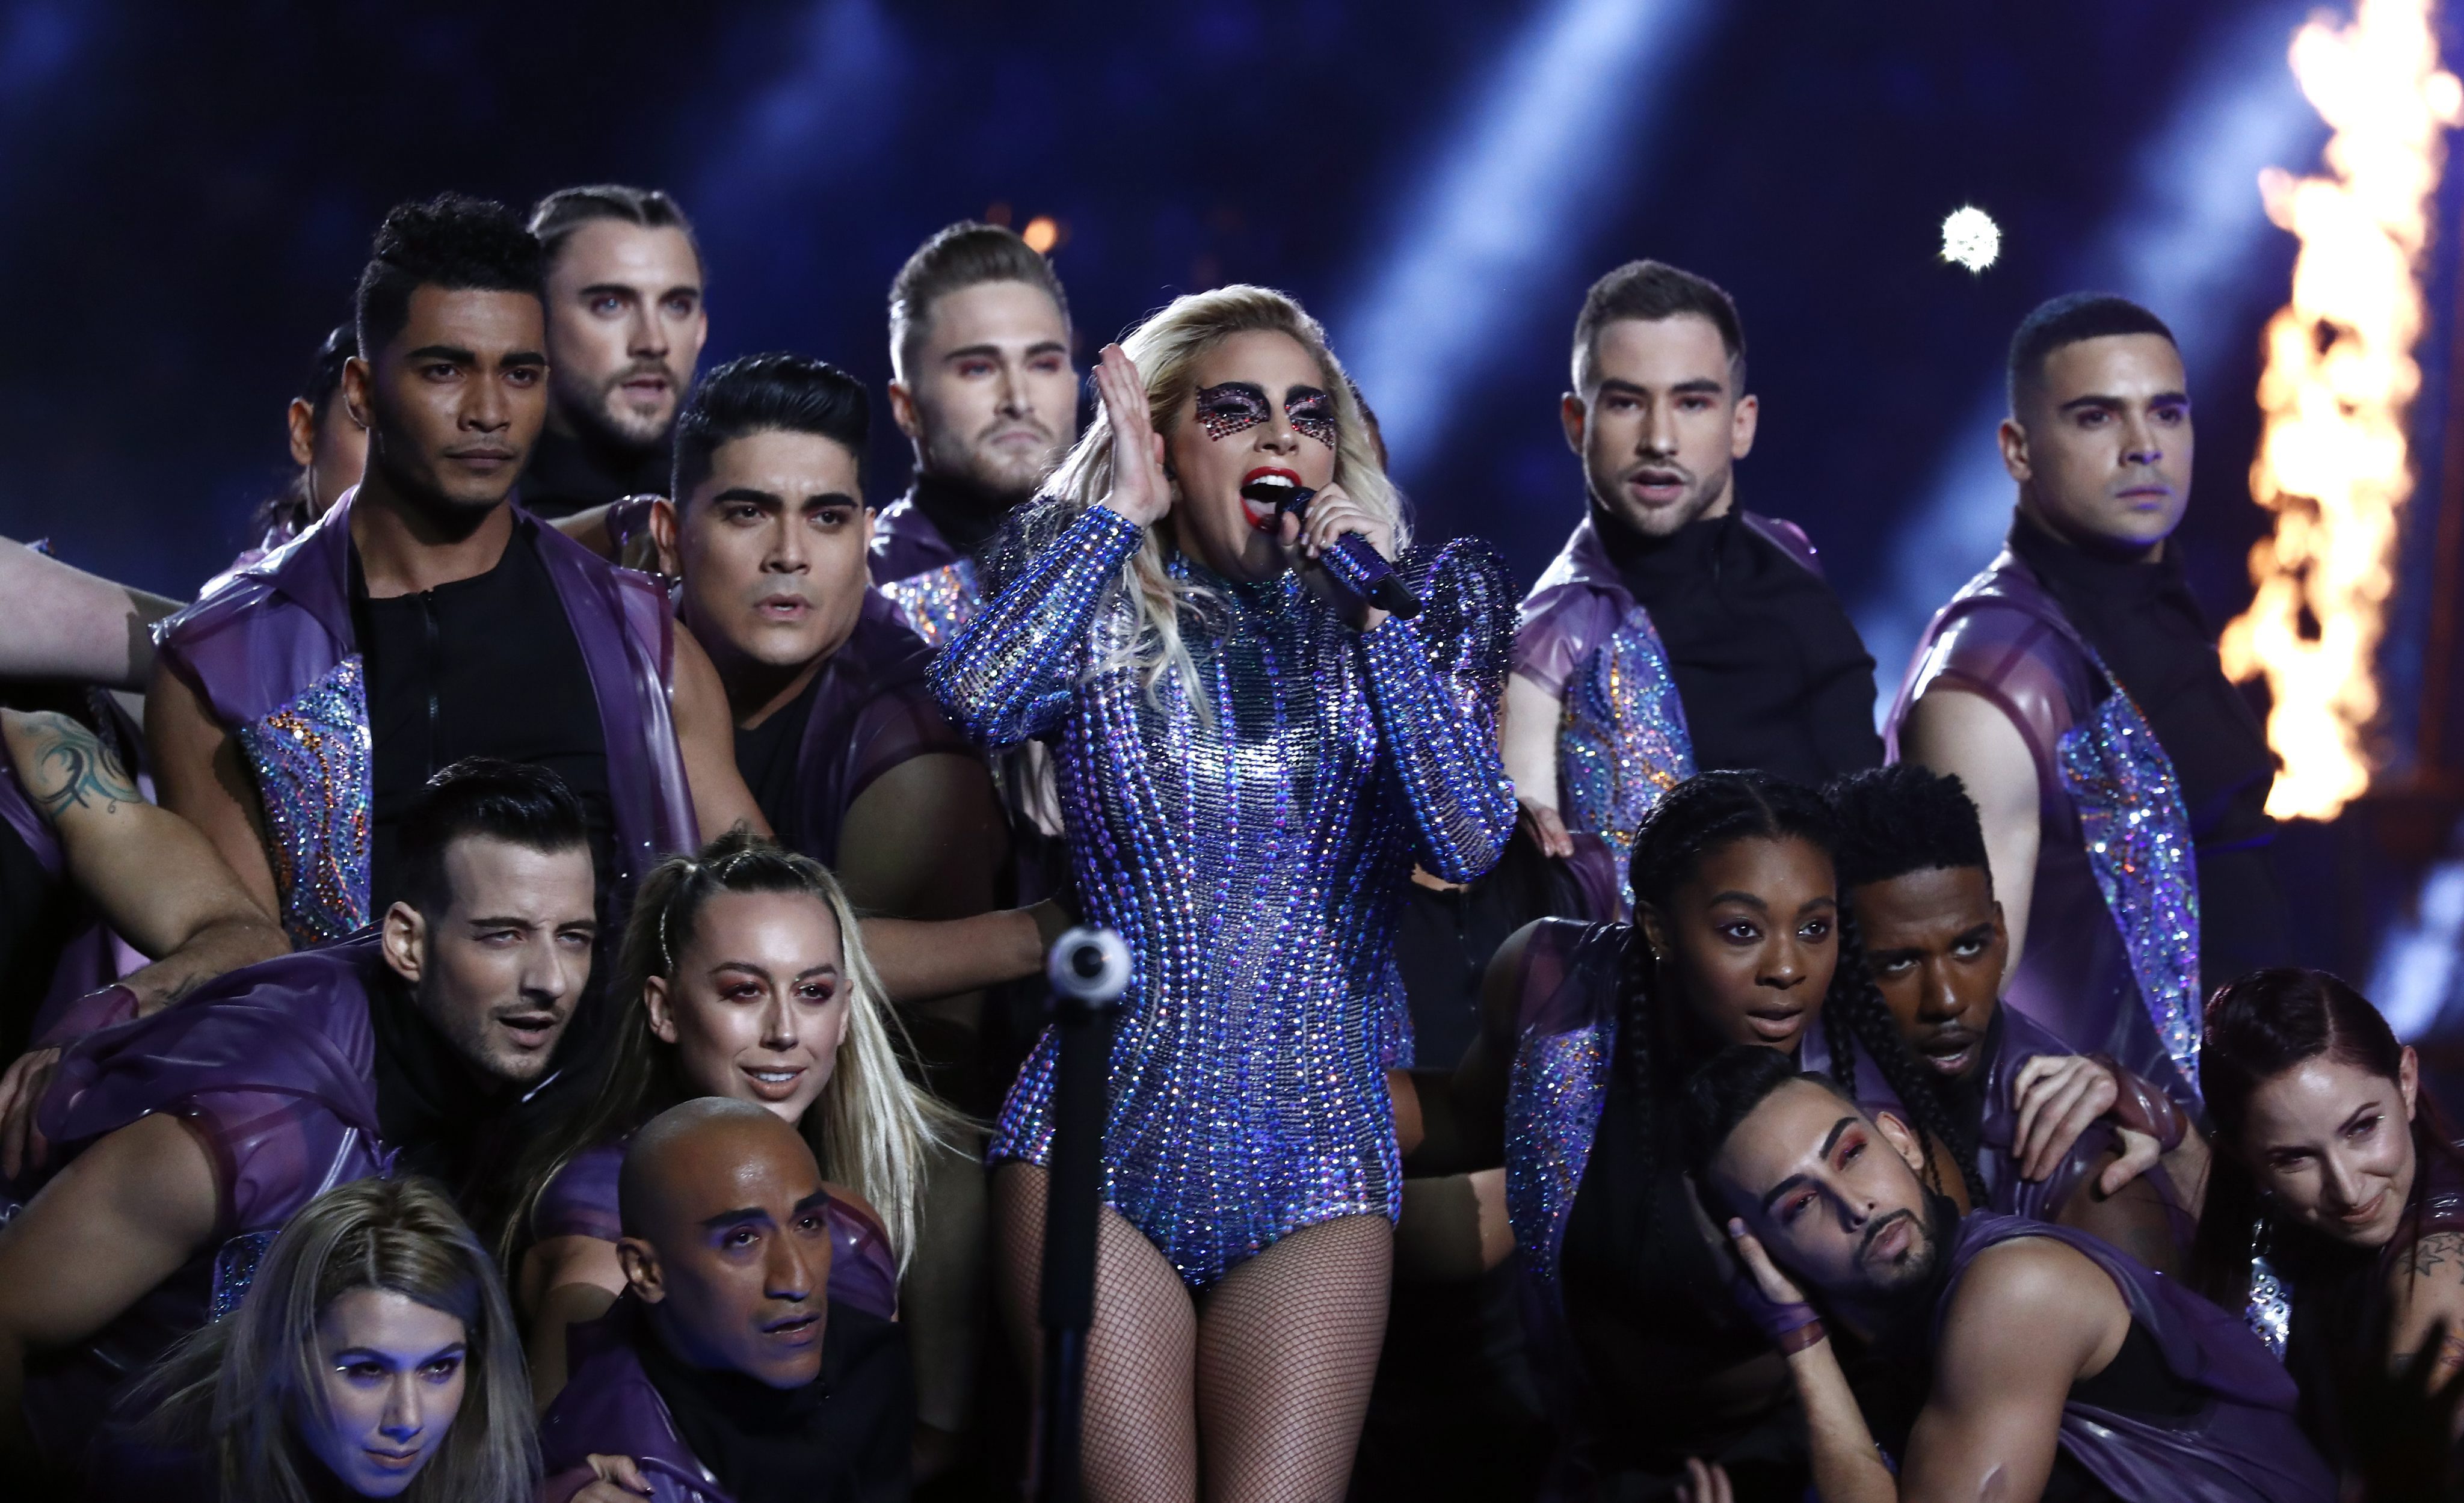 2017-02-05 19:16:25 epaselect epa05774044 US singer Lady Gaga performs during the Halftime Show of Super Bowl LI at NRG Stadium in Houston, Texas, USA, 05 February 2017. The AFC Champion Patriots play the NFC Champion Atlanta Falcons in the National Football League's annual championship game. EPA/LARRY W. SMITH